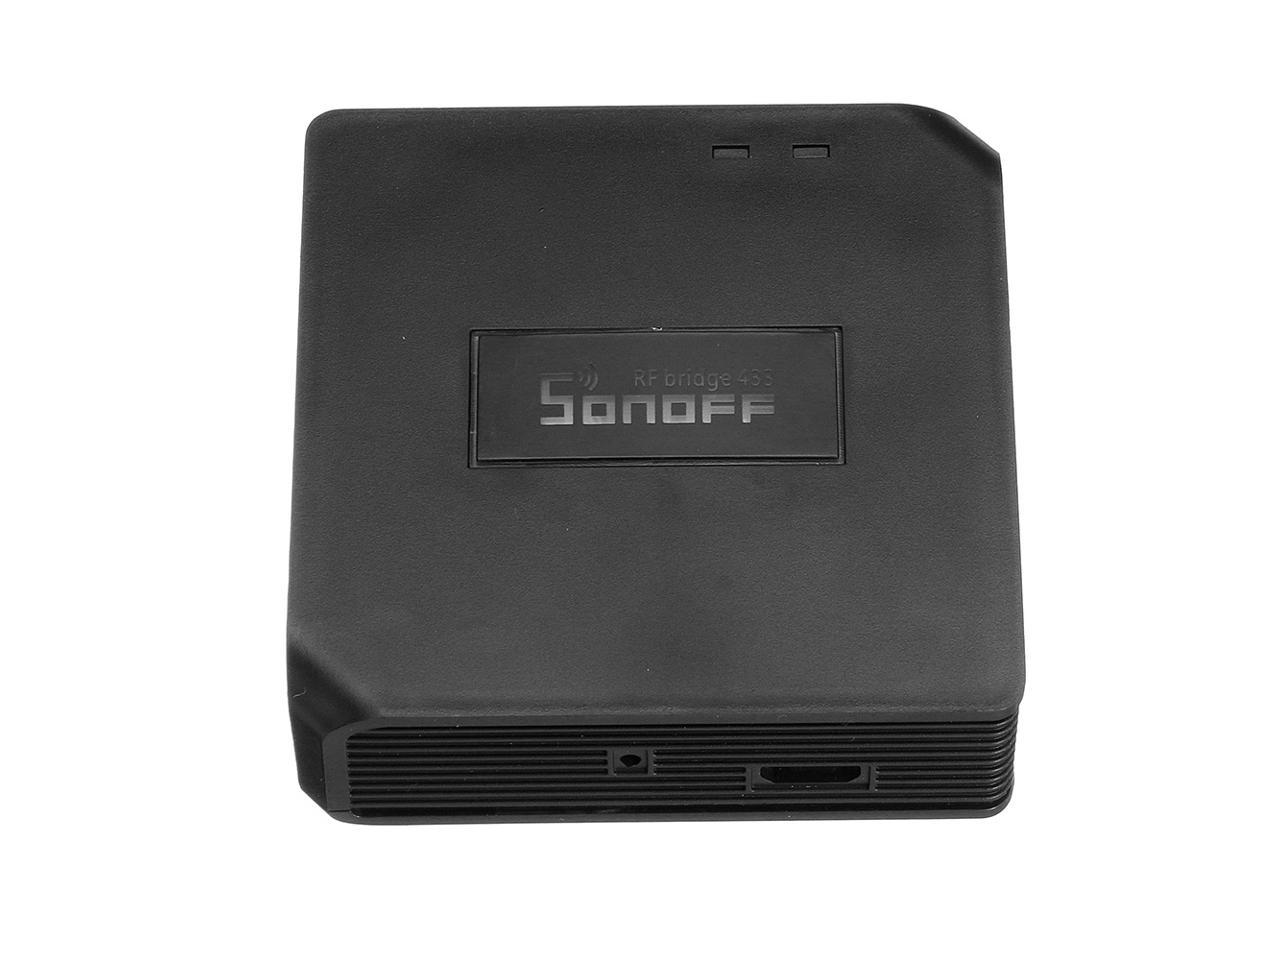 SONOFF® RF Bridge WiFi 433 MHz Replacement Smart Home Automation Universal 